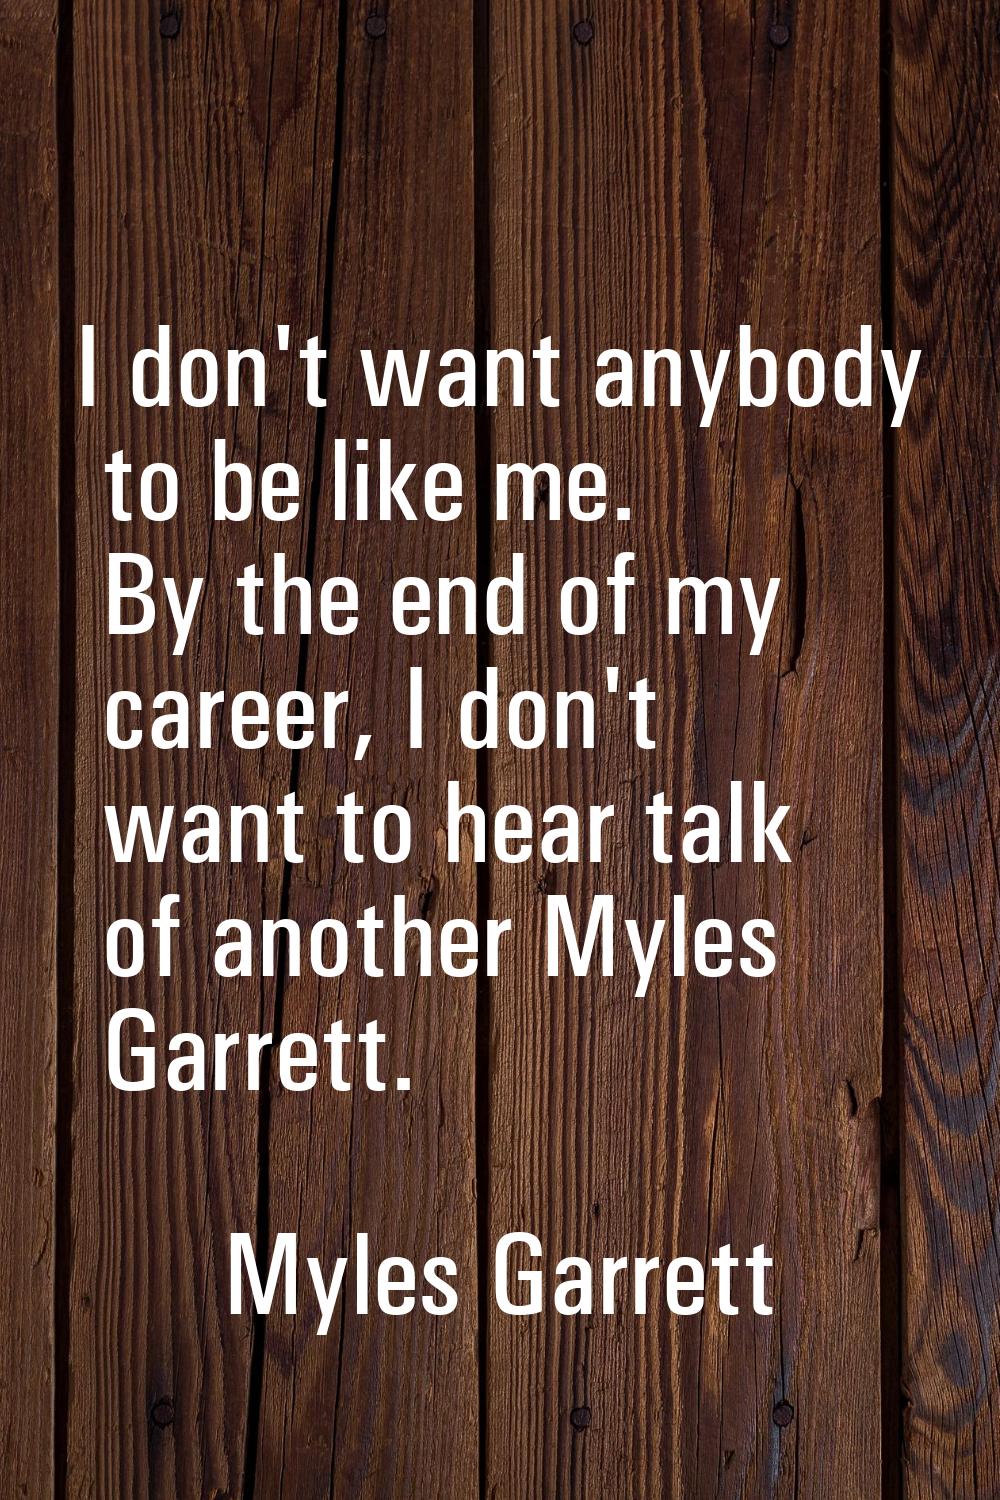 I don't want anybody to be like me. By the end of my career, I don't want to hear talk of another M